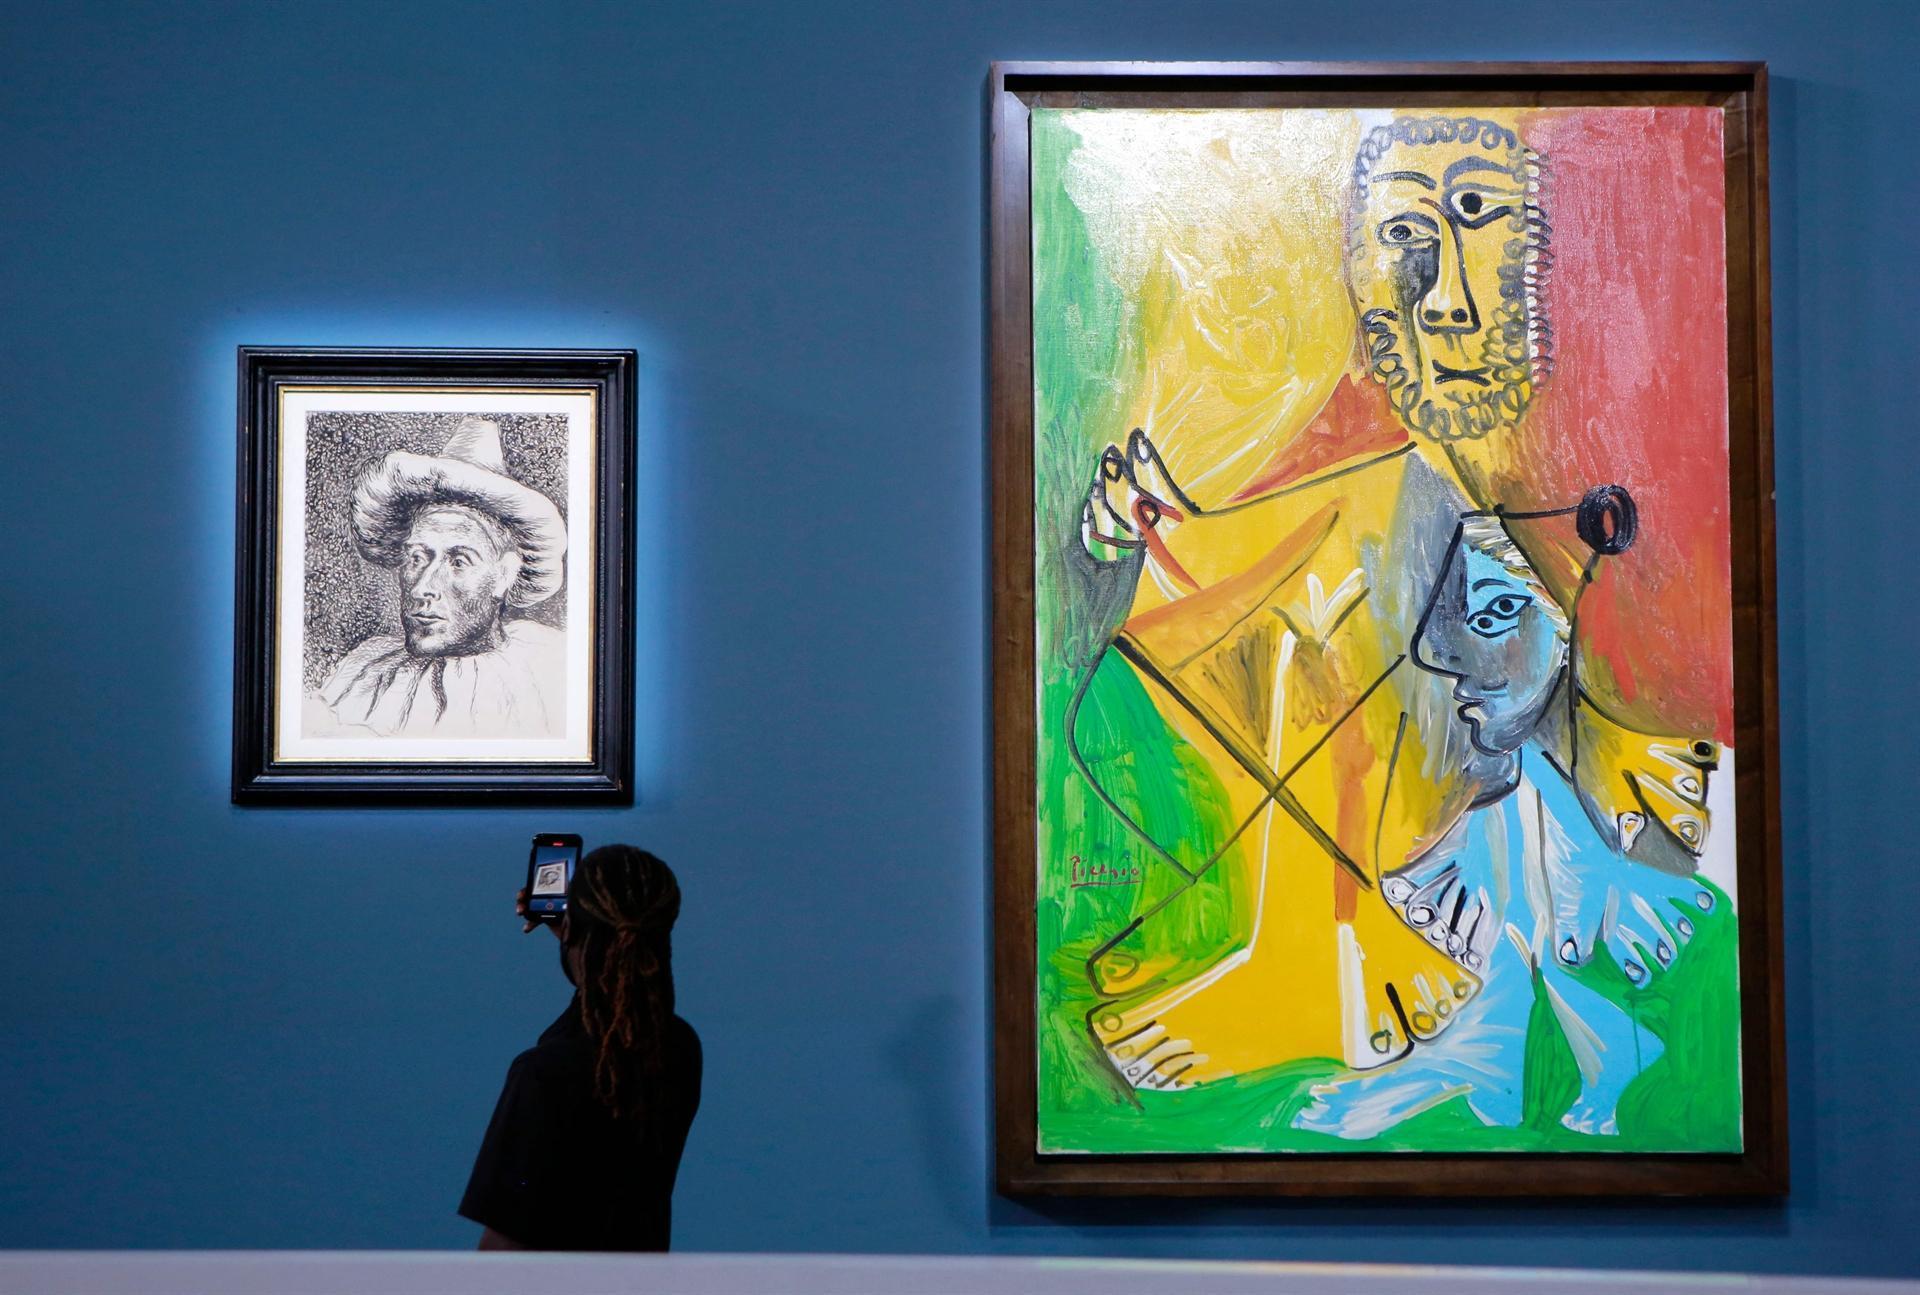 Picasso masterpieces fetch $108.9 mln at Sotheby's auction